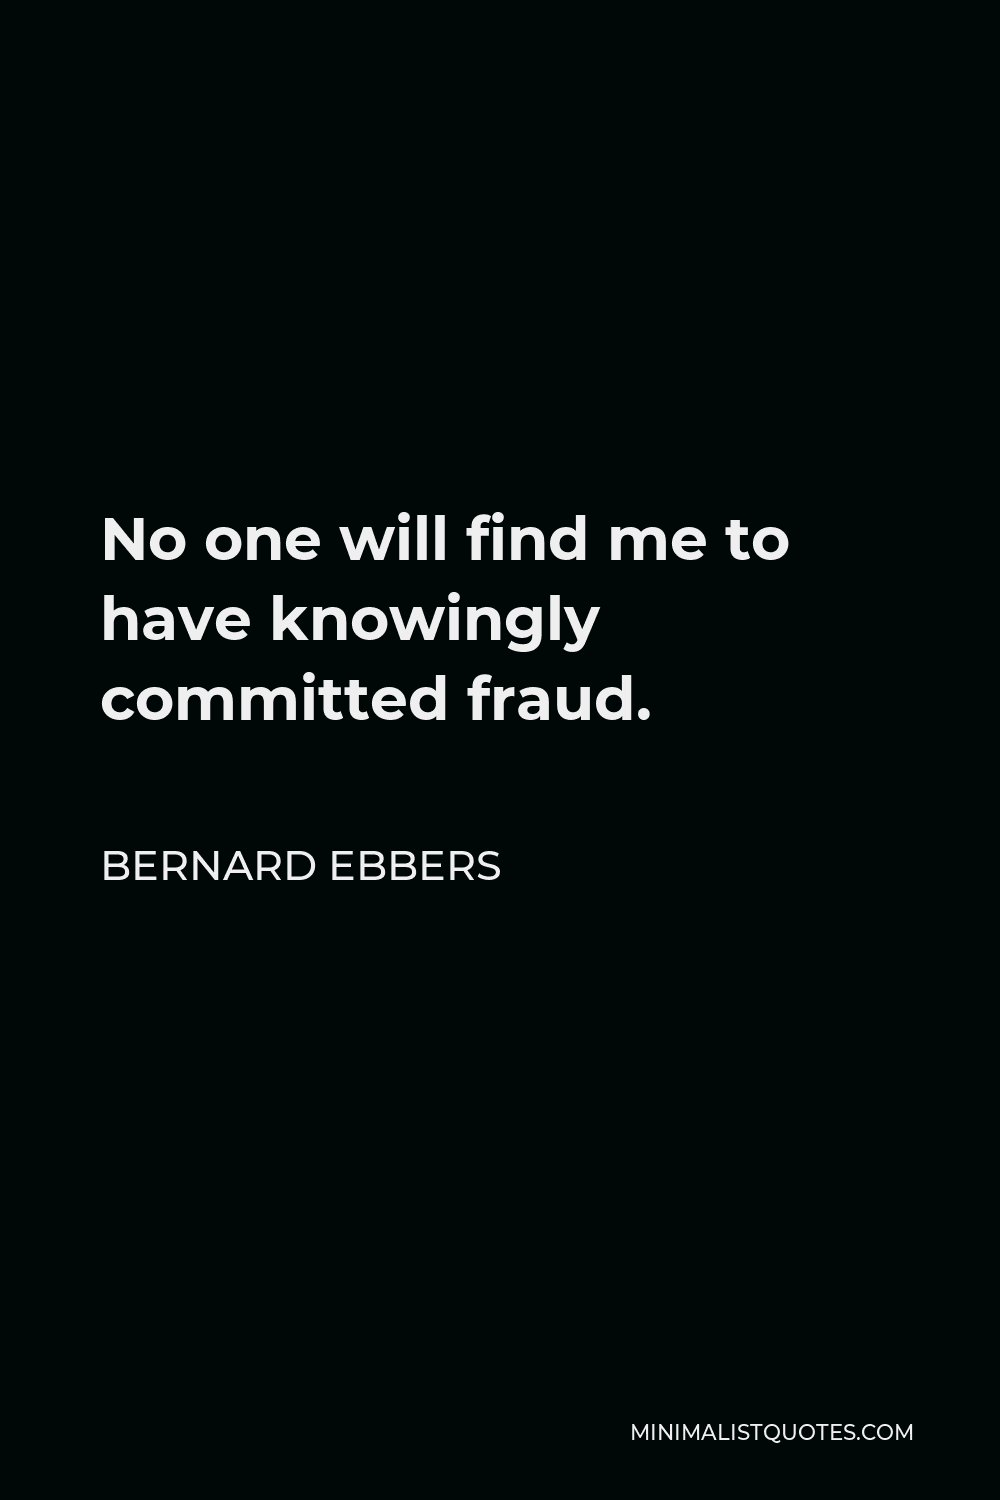 Bernard Ebbers Quote - No one will find me to have knowingly committed fraud.